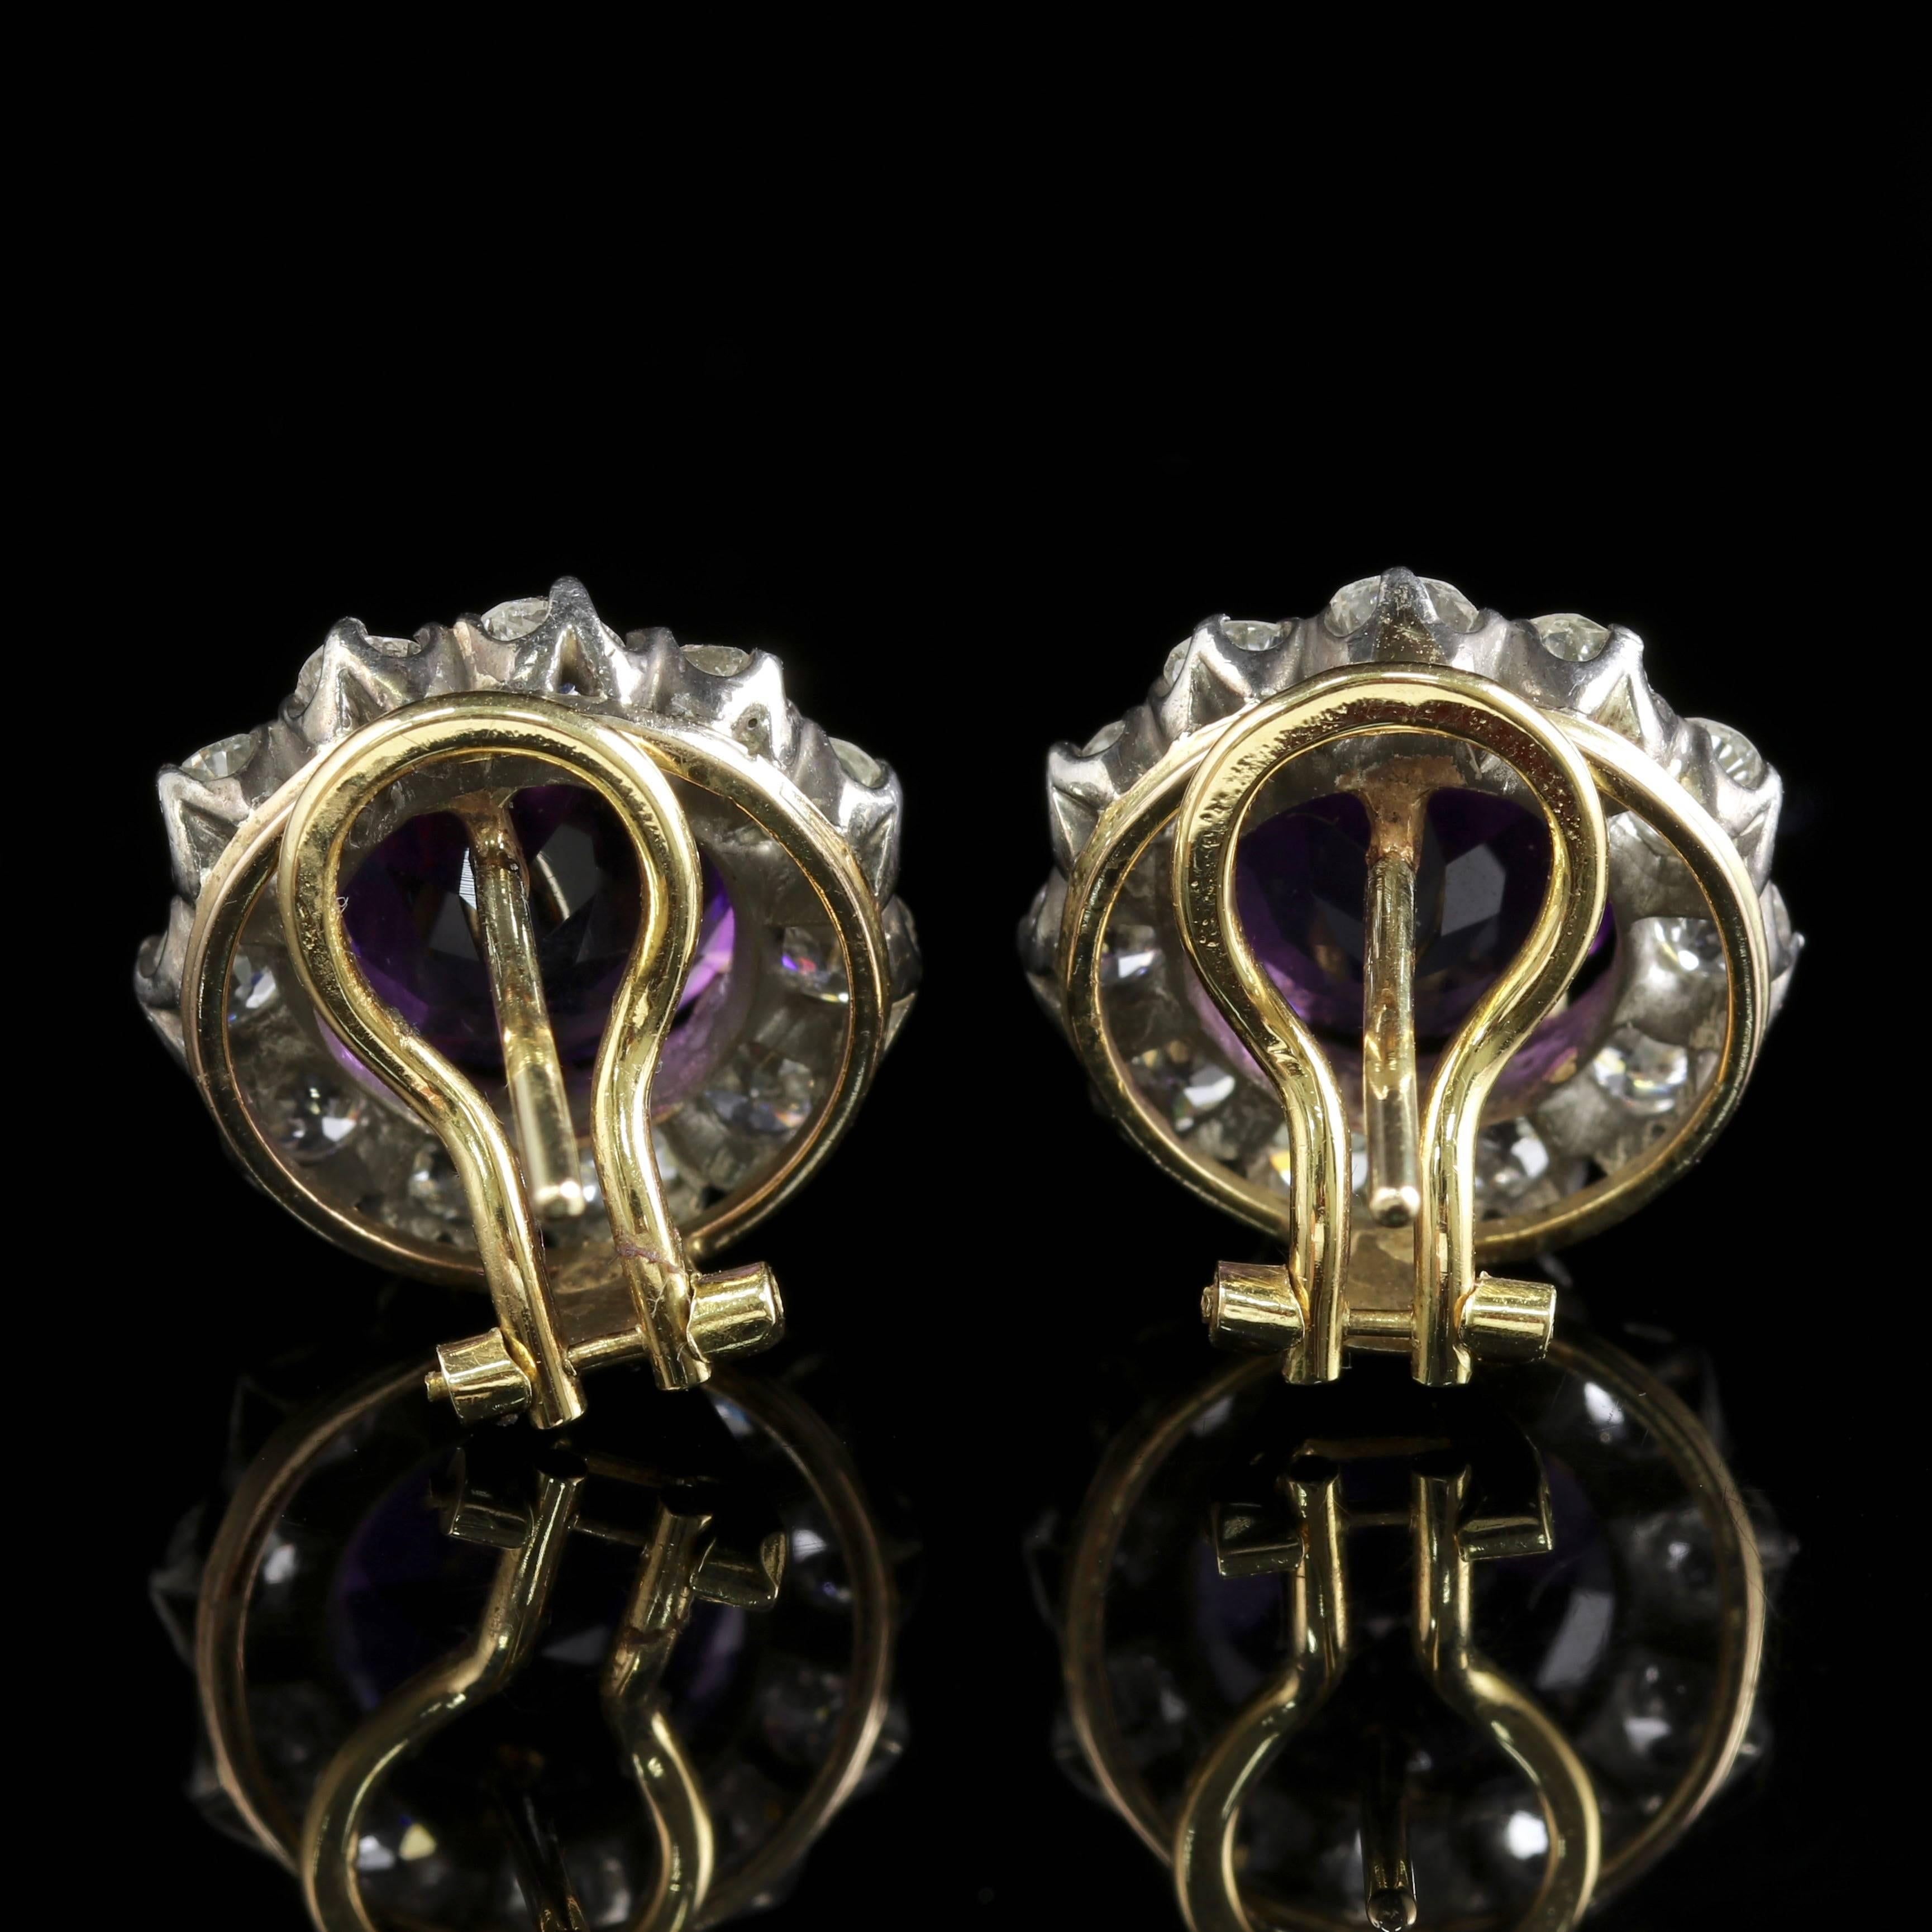 To read more please click continue reading below-

These fabulous Antique 18ct Yellow Gold Edwardian earrings are set with 3.50ct Amethyst in each earring.

Amethyst has been highly esteemed throughout the ages for its stunning beauty and legendary